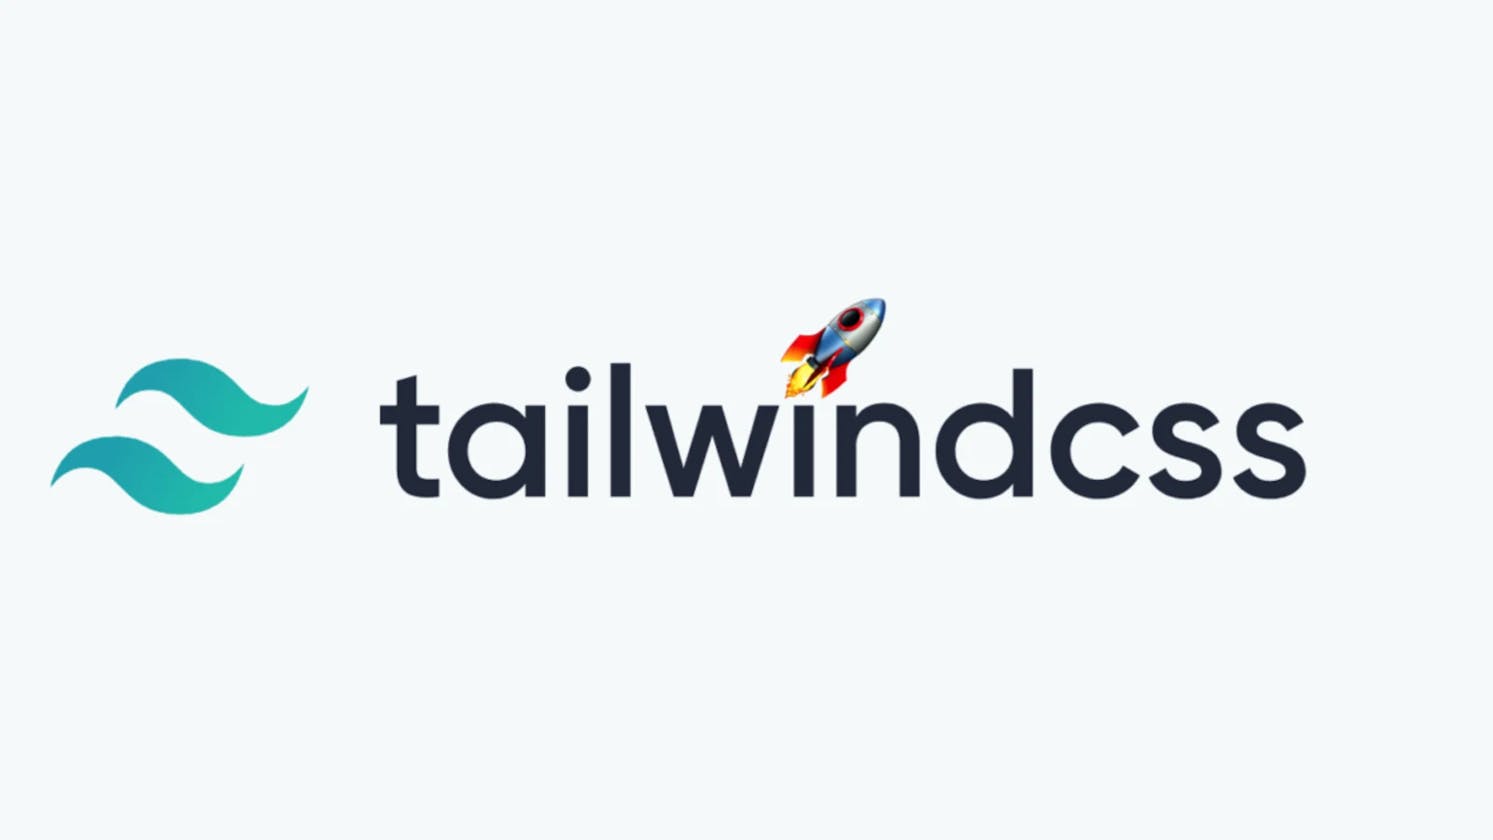 How to use background image in Tailwind CSS ?